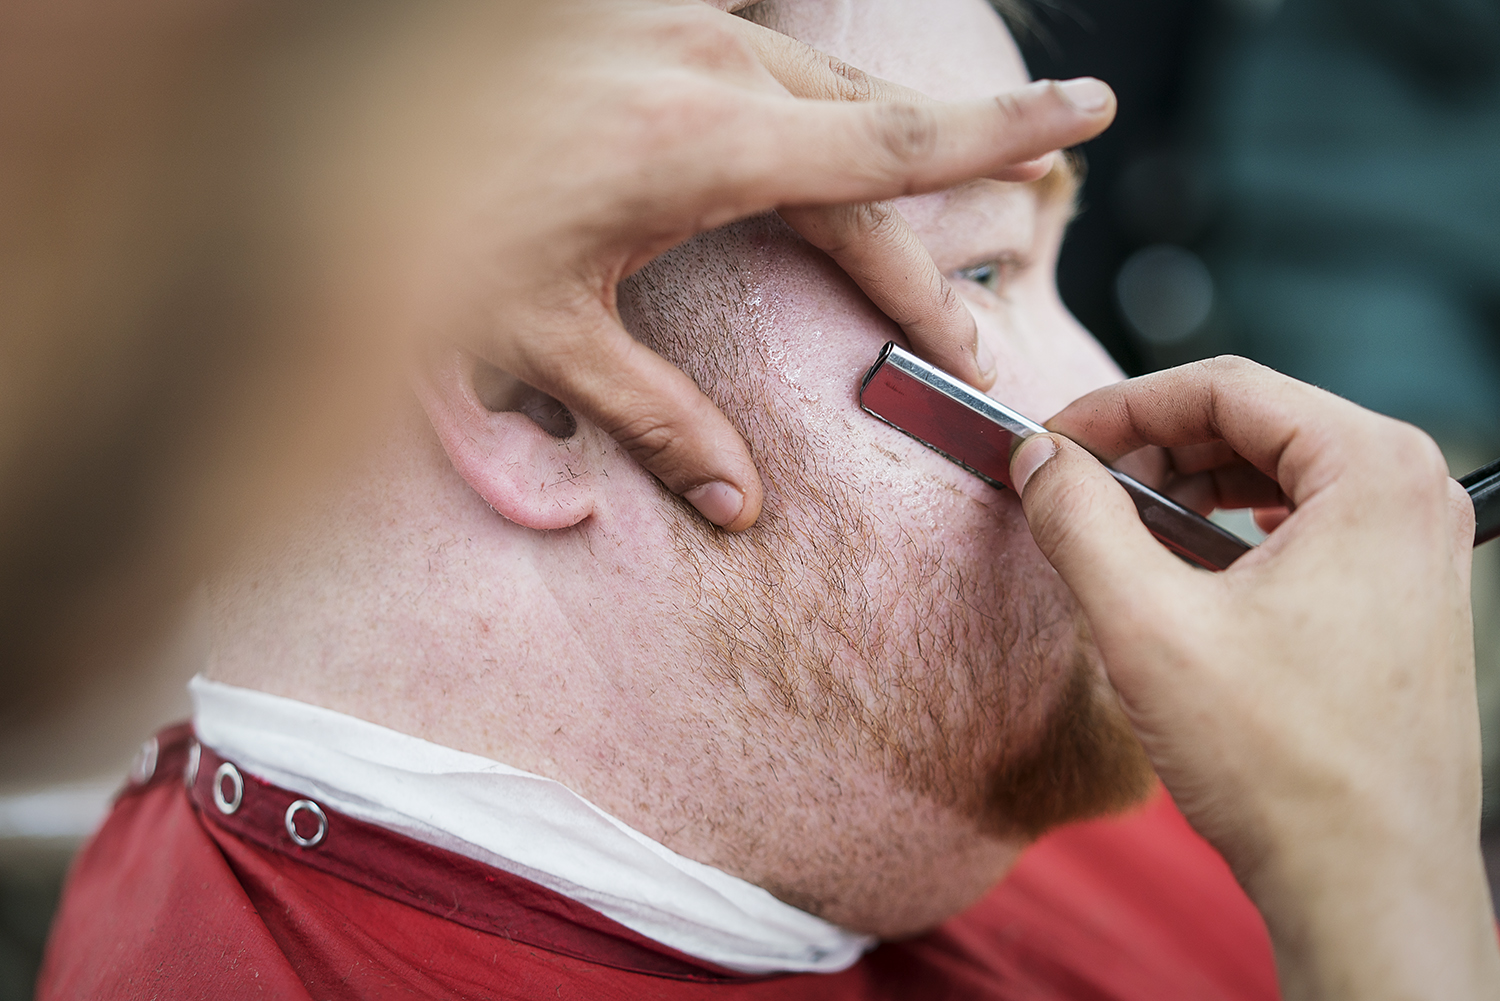 Flint, MI - Tuesday, February 6, 2018: Manuel Rodarte, 35, from Saginaw, a student at the Flint Institute of Barbering., has his beard lined up with a straight razor by barber Nick Gallardo, 26, from Bay City, during the slow hours of the day when st